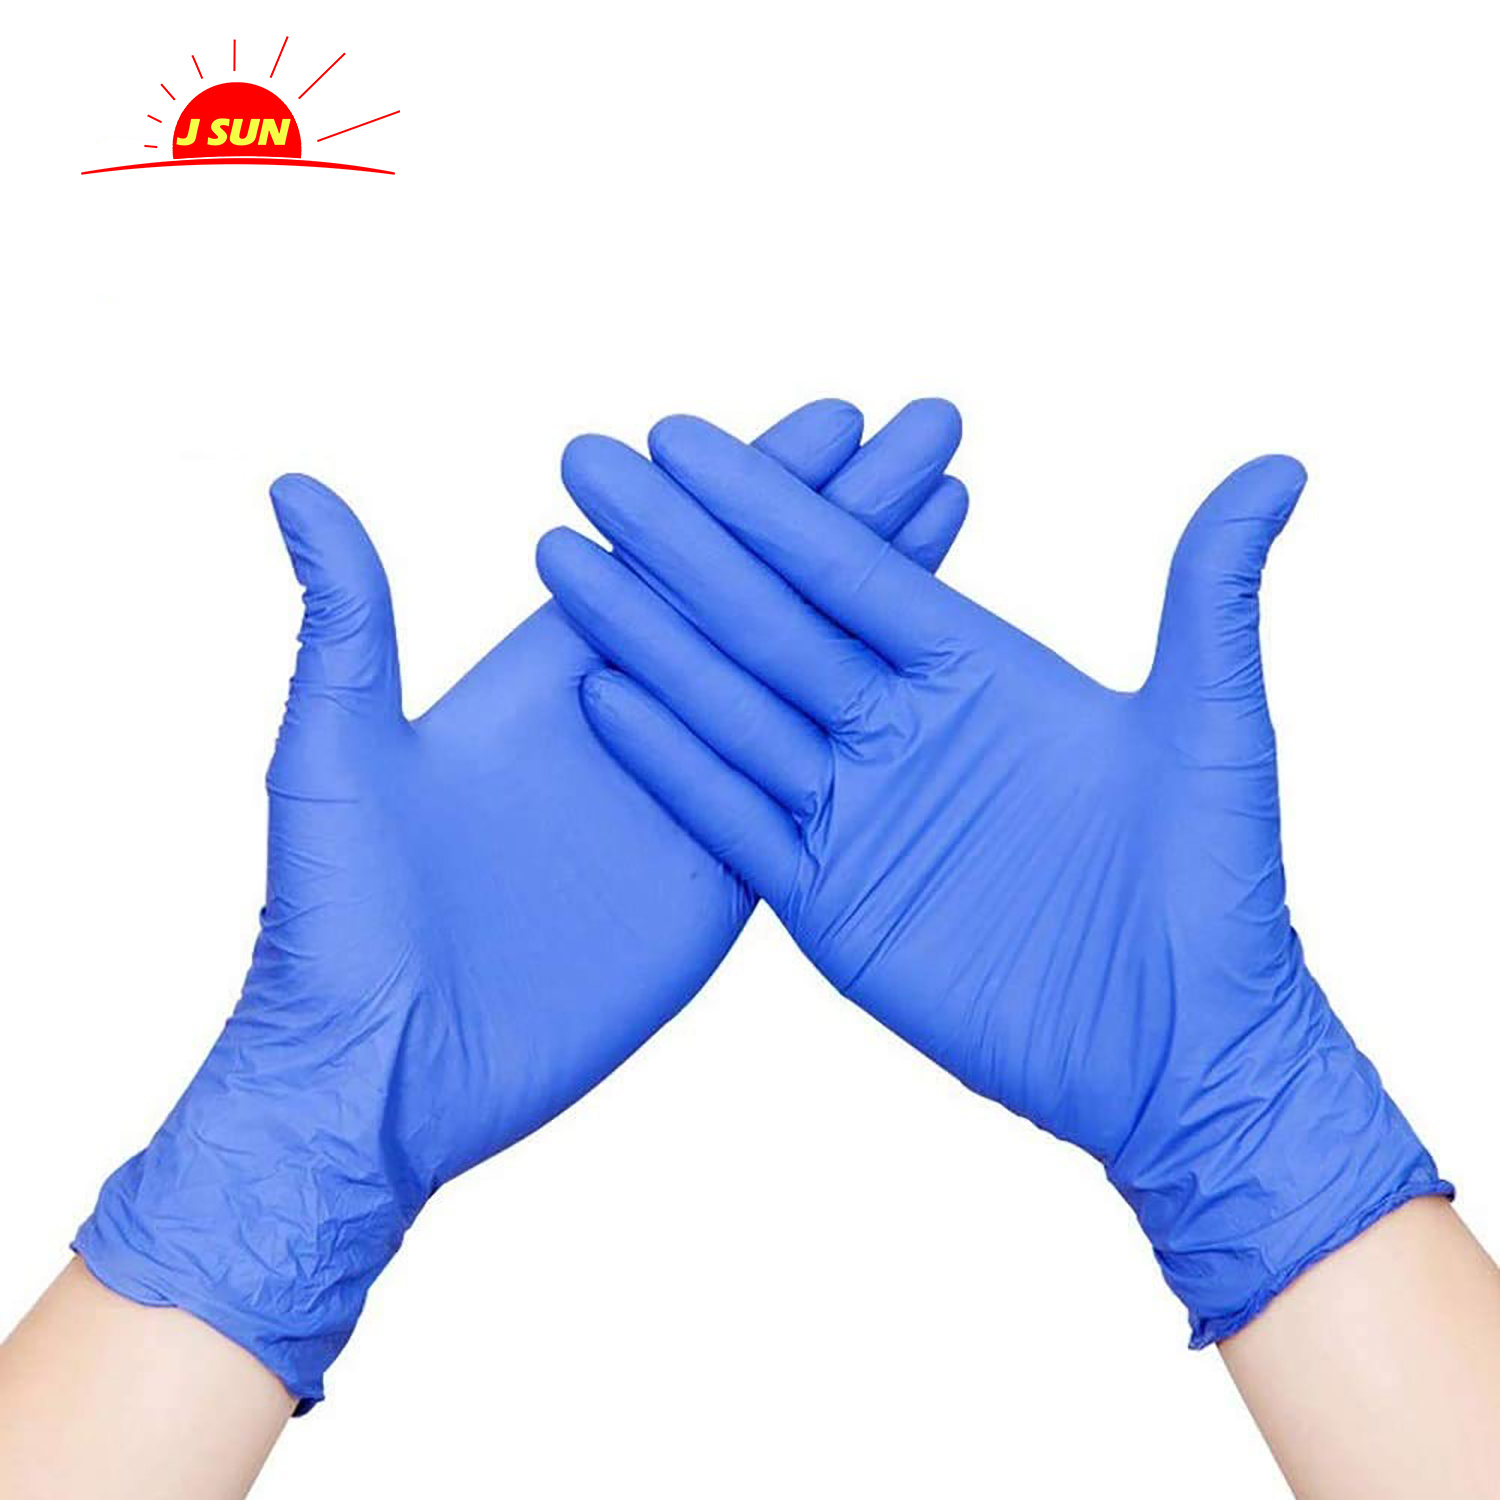 Nitrile glove for examination and medical